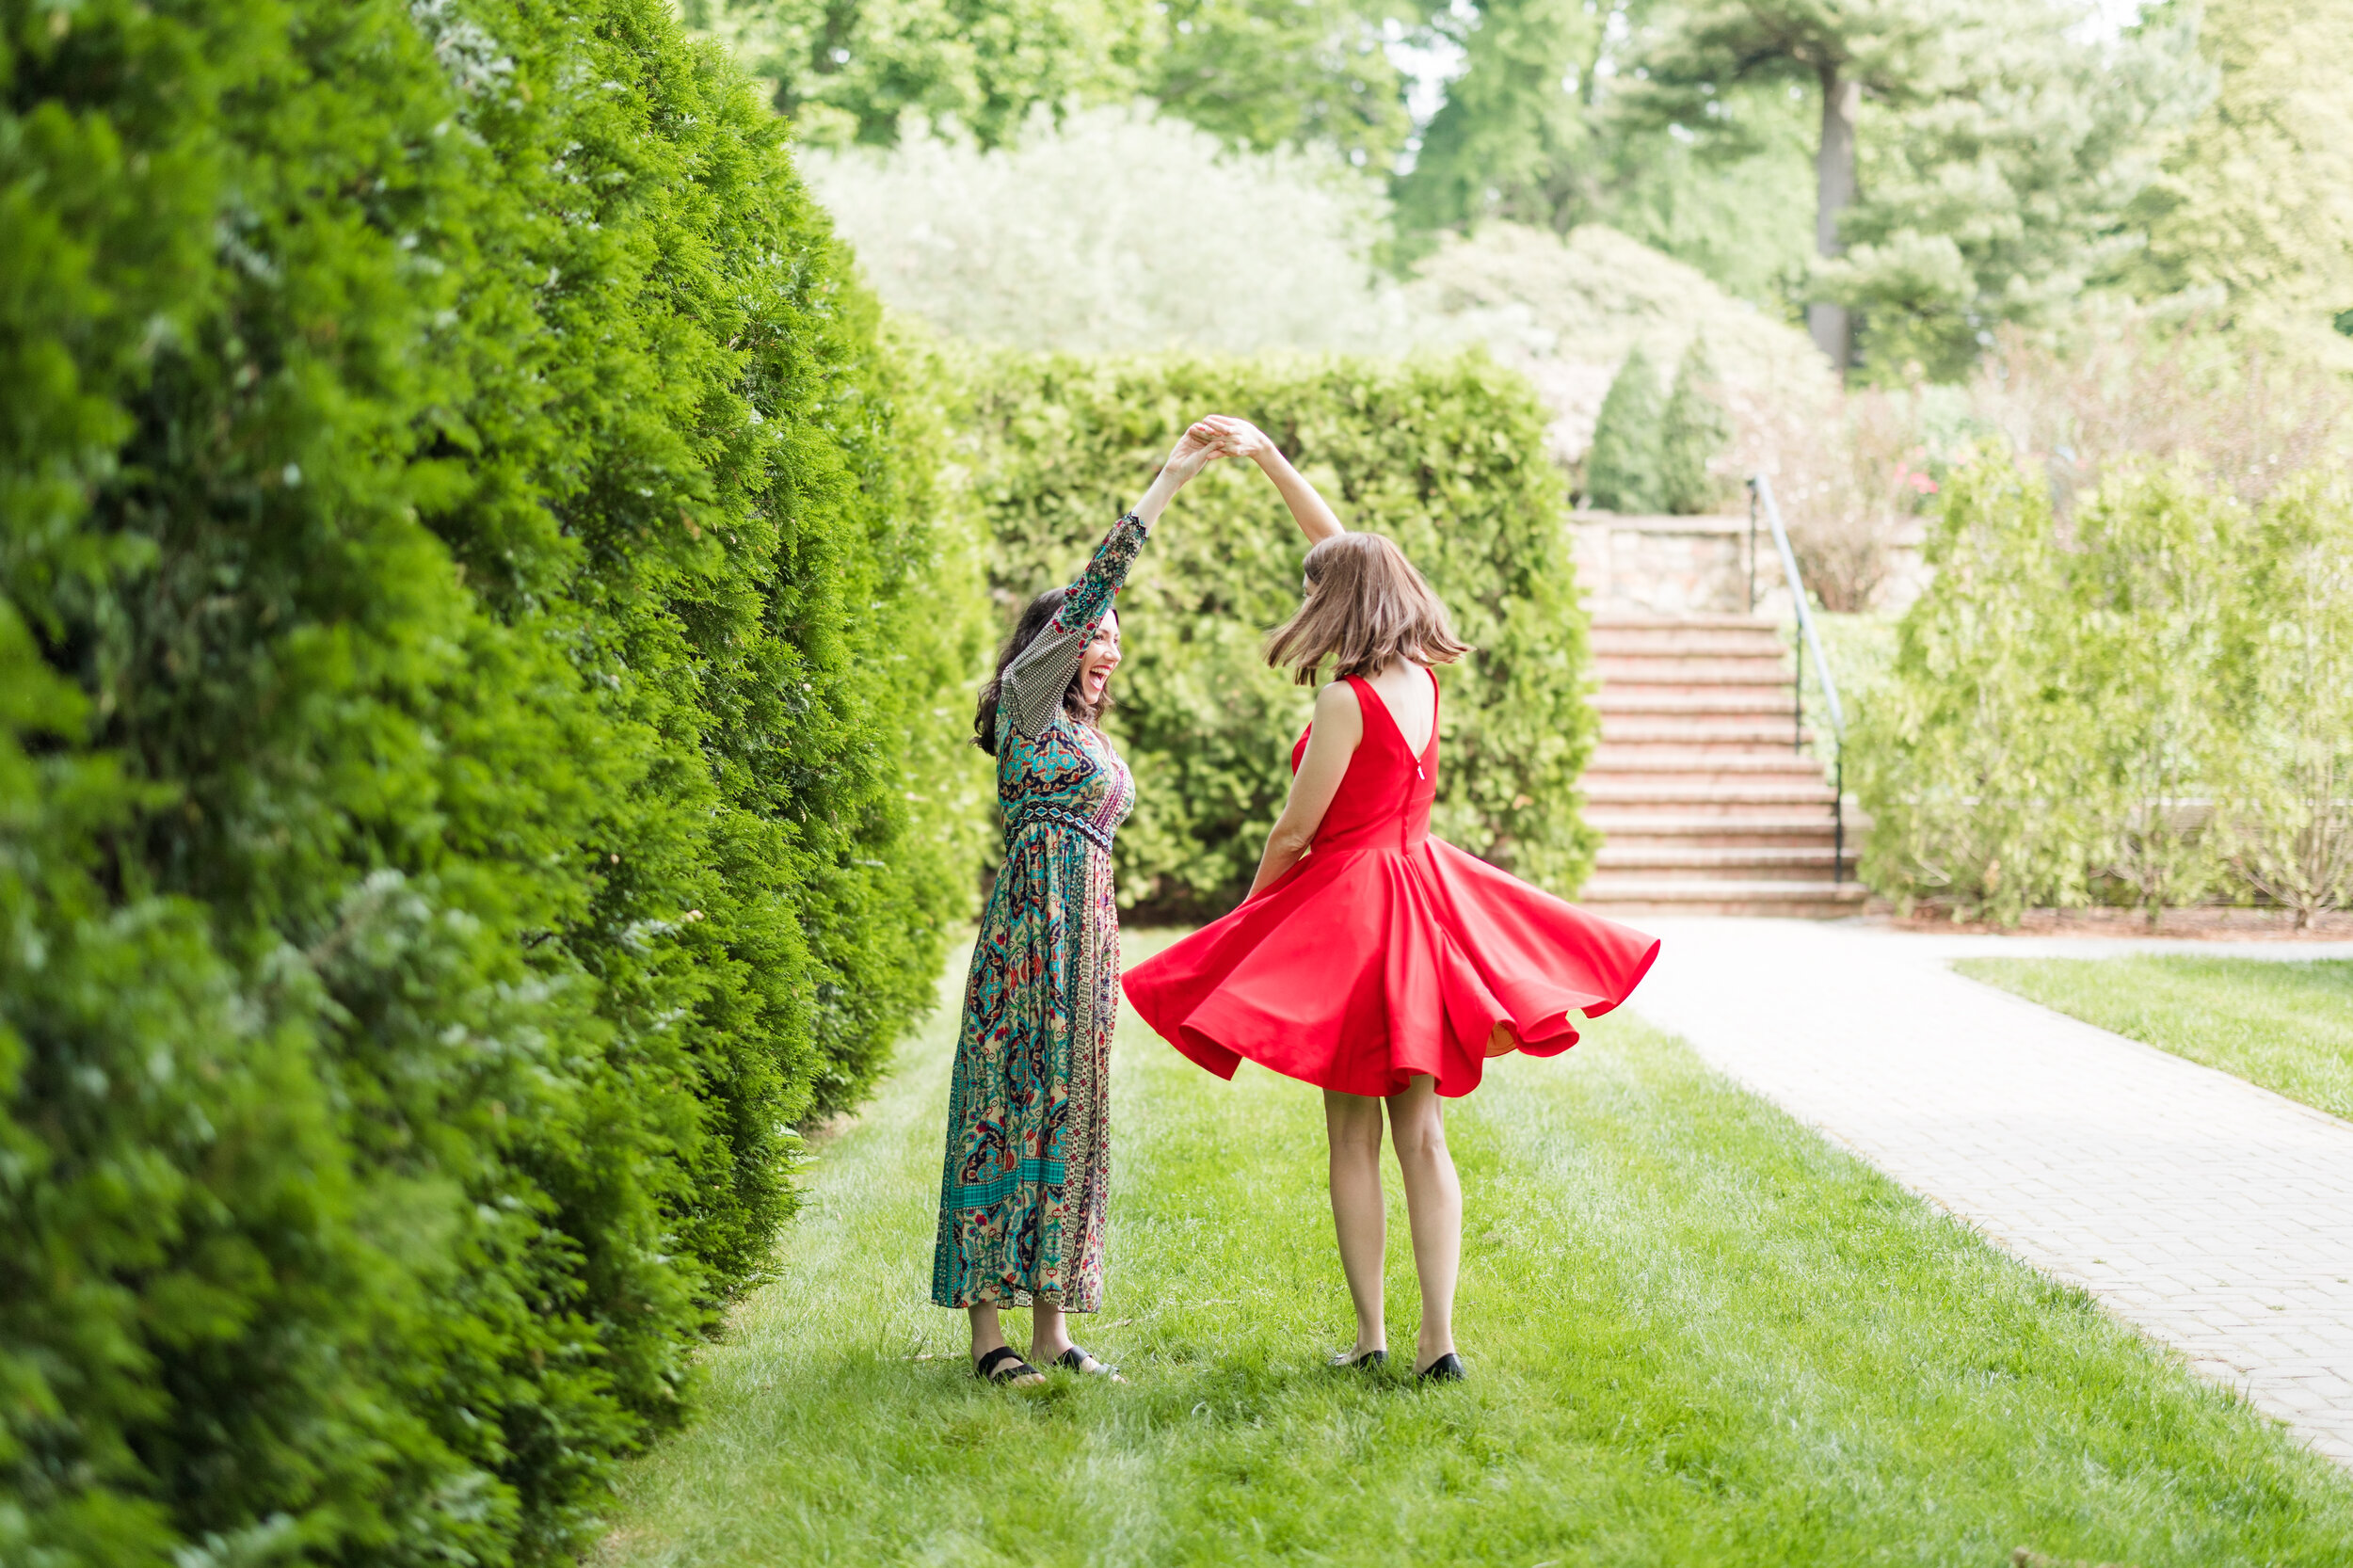 Dorothy-and-Kate-LGBTQ-Longwood-Gardens-Engagement-Session-33.jpg